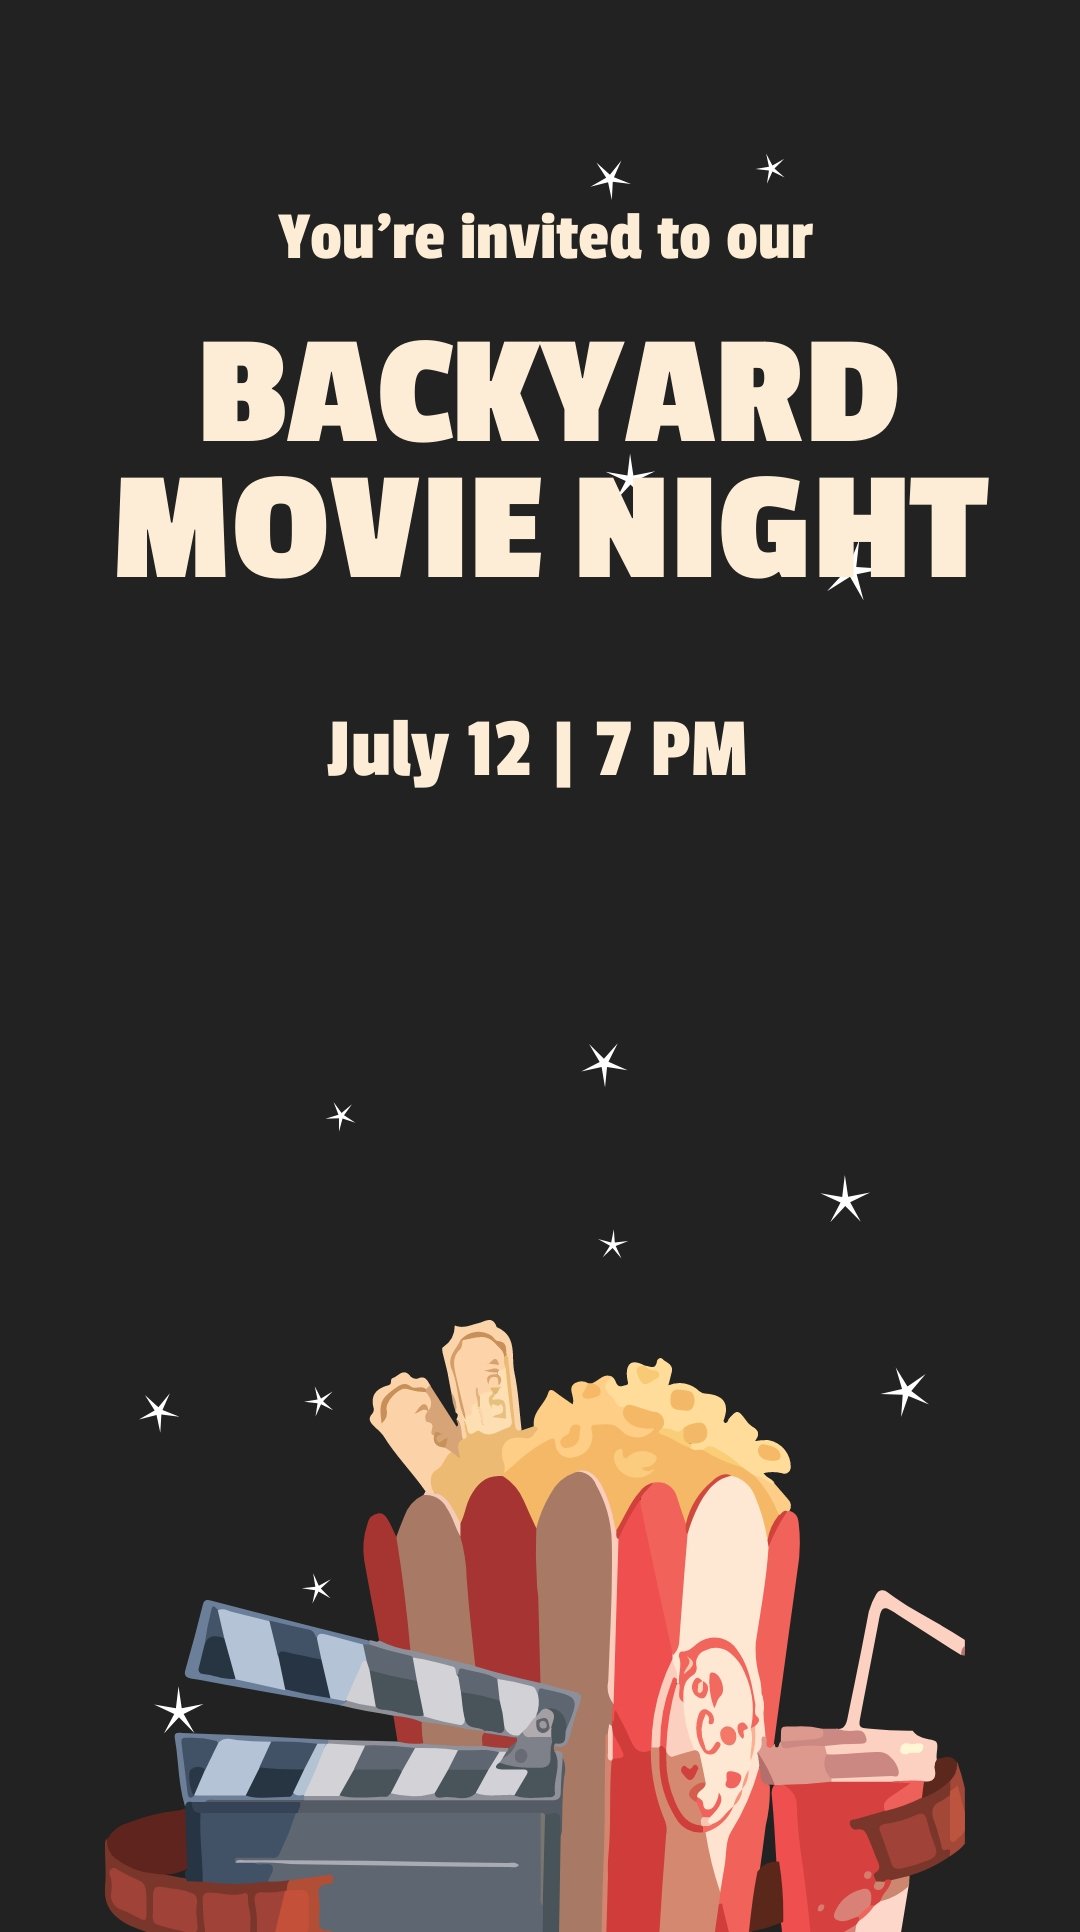 Free Movie Night Invitation Whatsapp Post Template Download in PNG